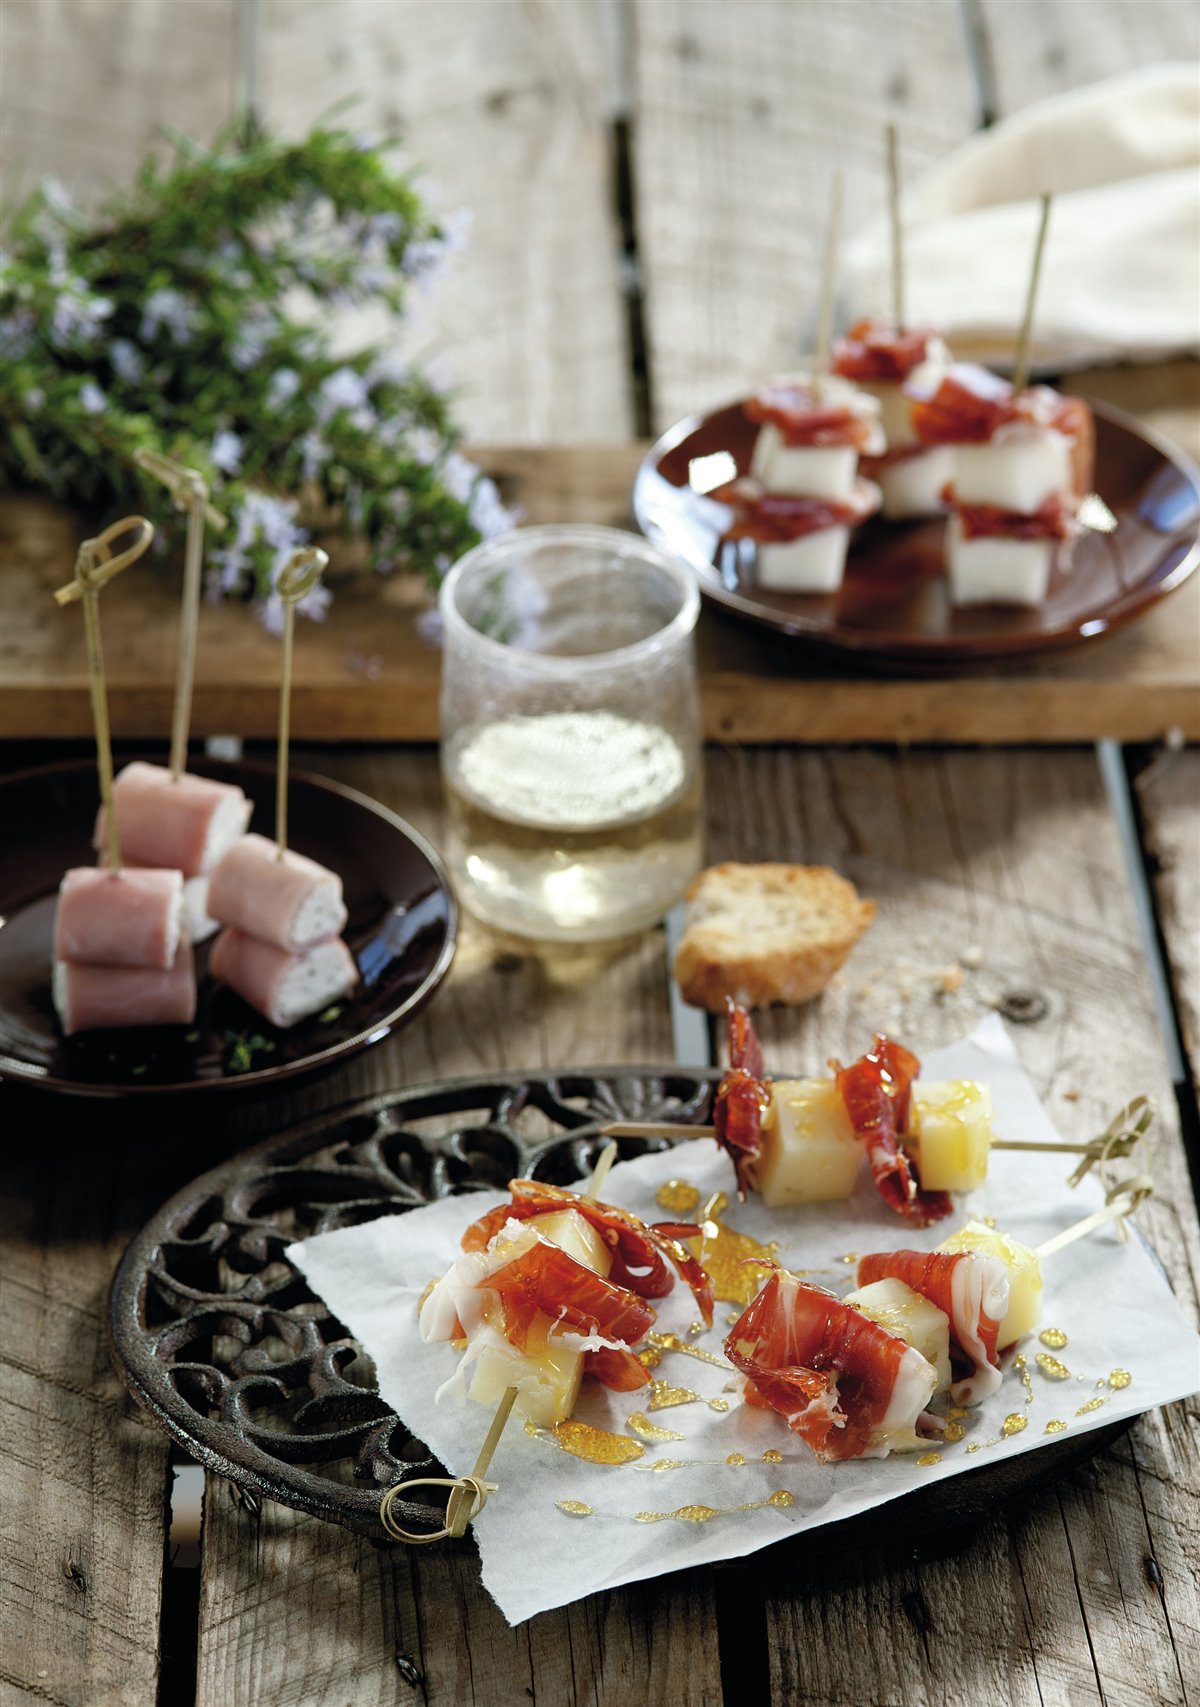 SIMPLE RECIPES WITH HAM: IBERIAN HAM AND CURED CHEESE;  YORK TO FINE HERBS;  MELON WITH SERANO. 